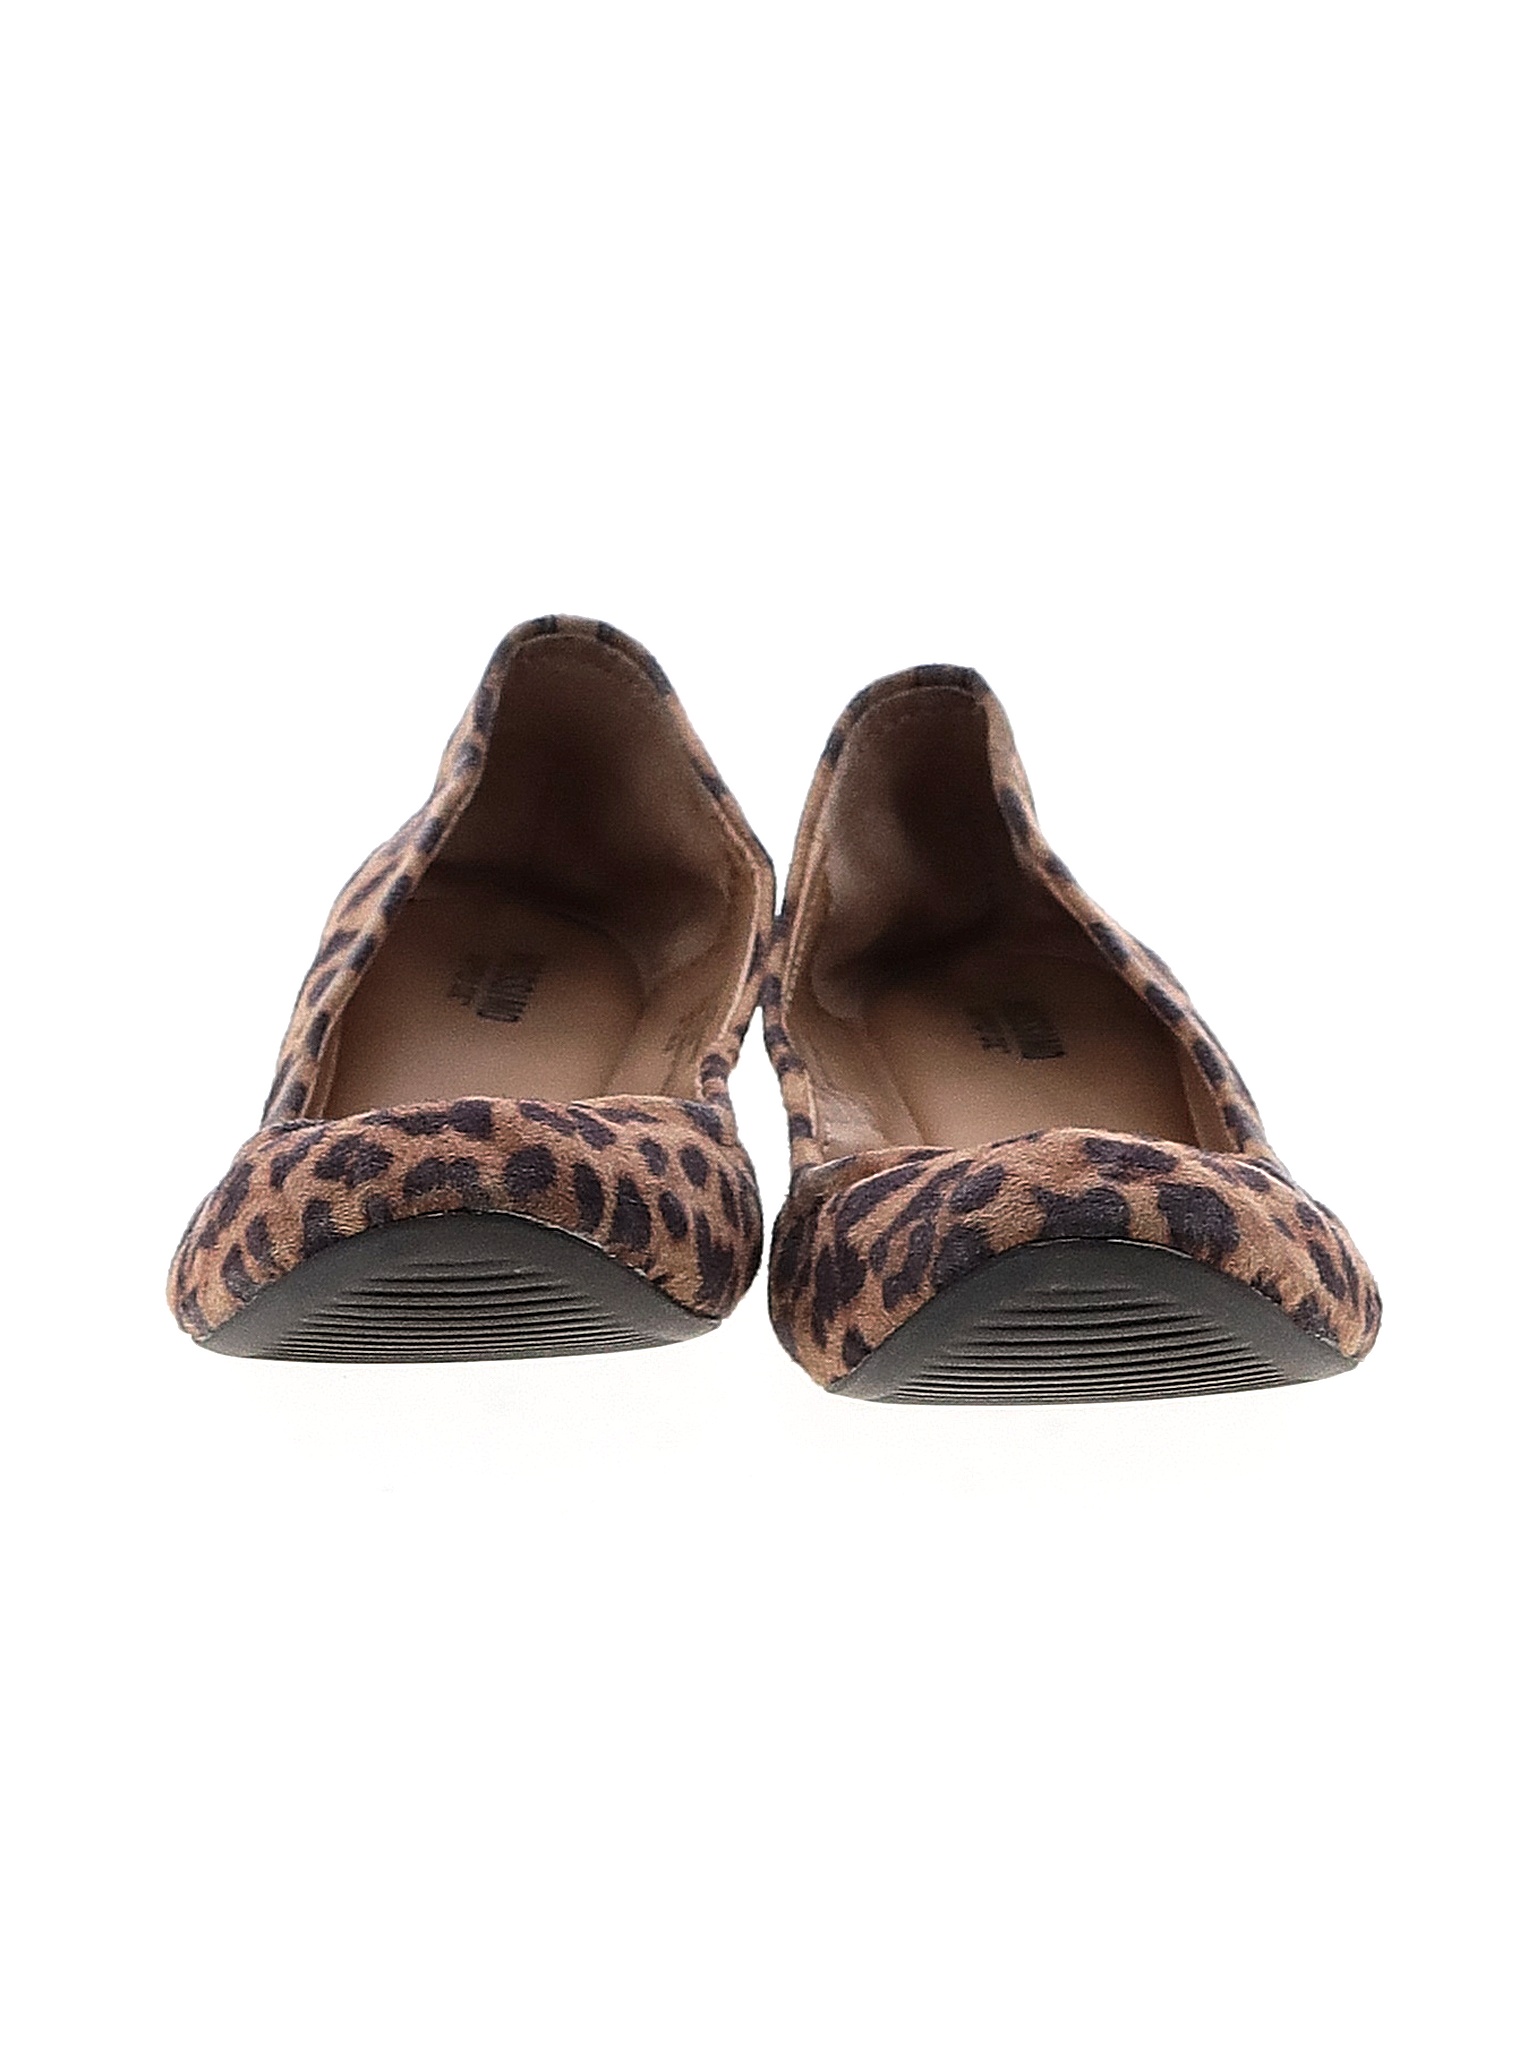 Mossimo Supply Co. Women's Shoes On Sale Up To 90% Off Retail | thredUP